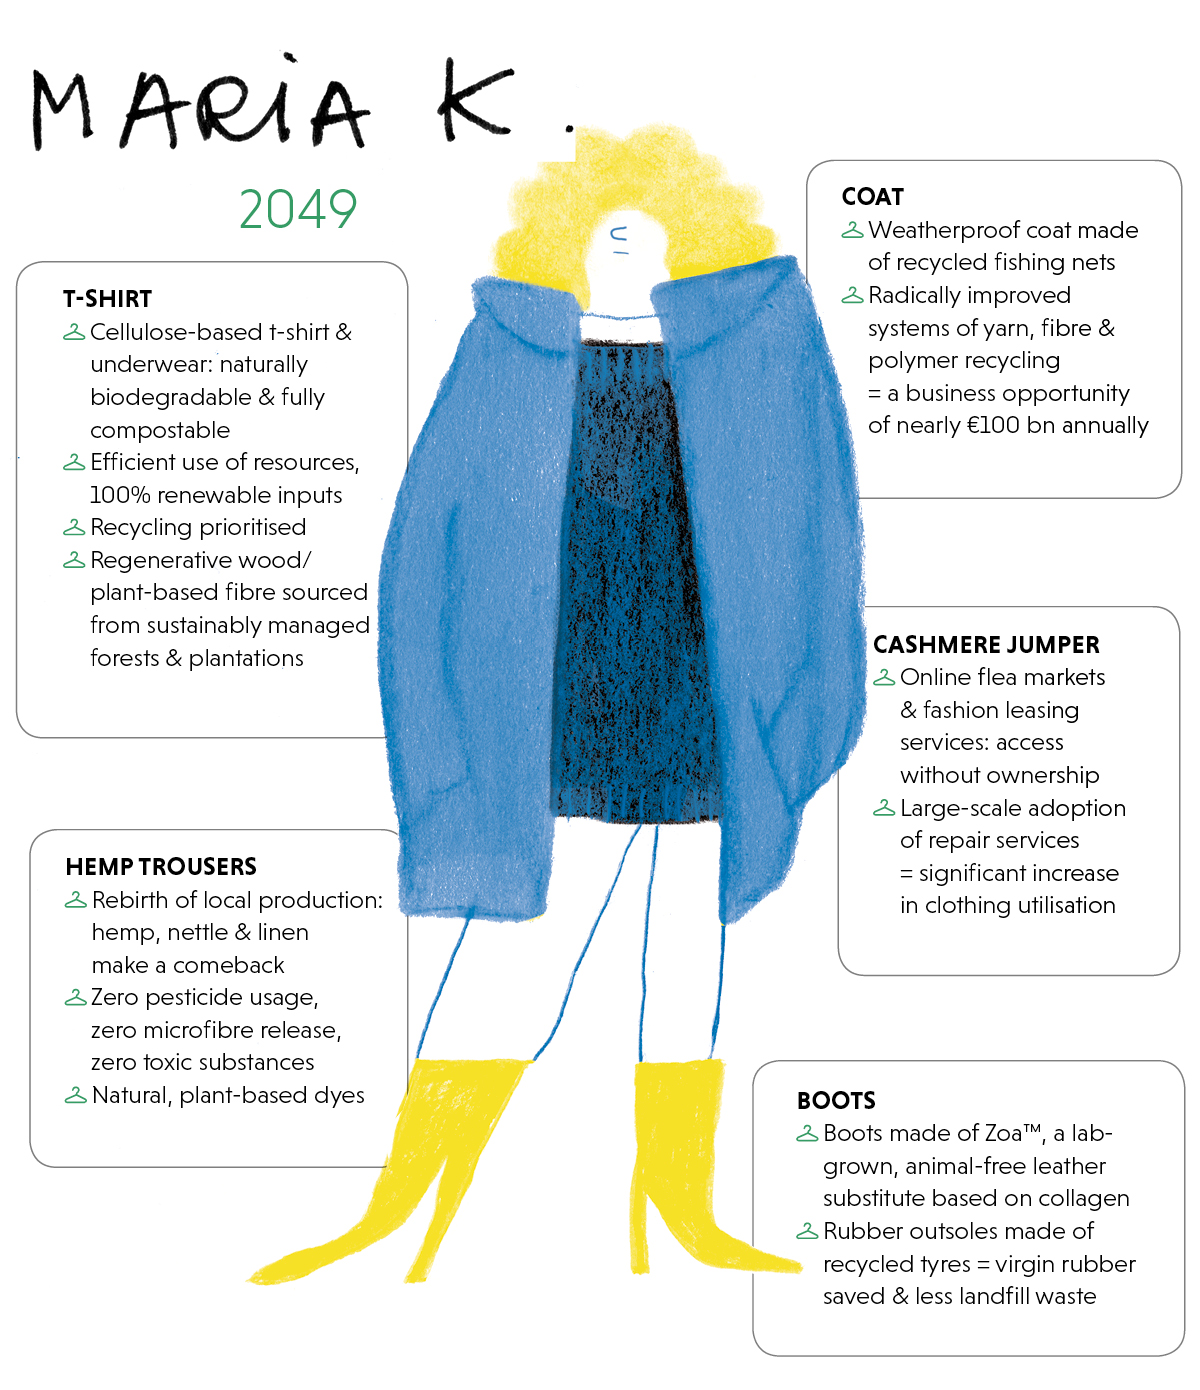 Infographic showing the outfit of Maria K in 2049 and its social, health and environmental impacts